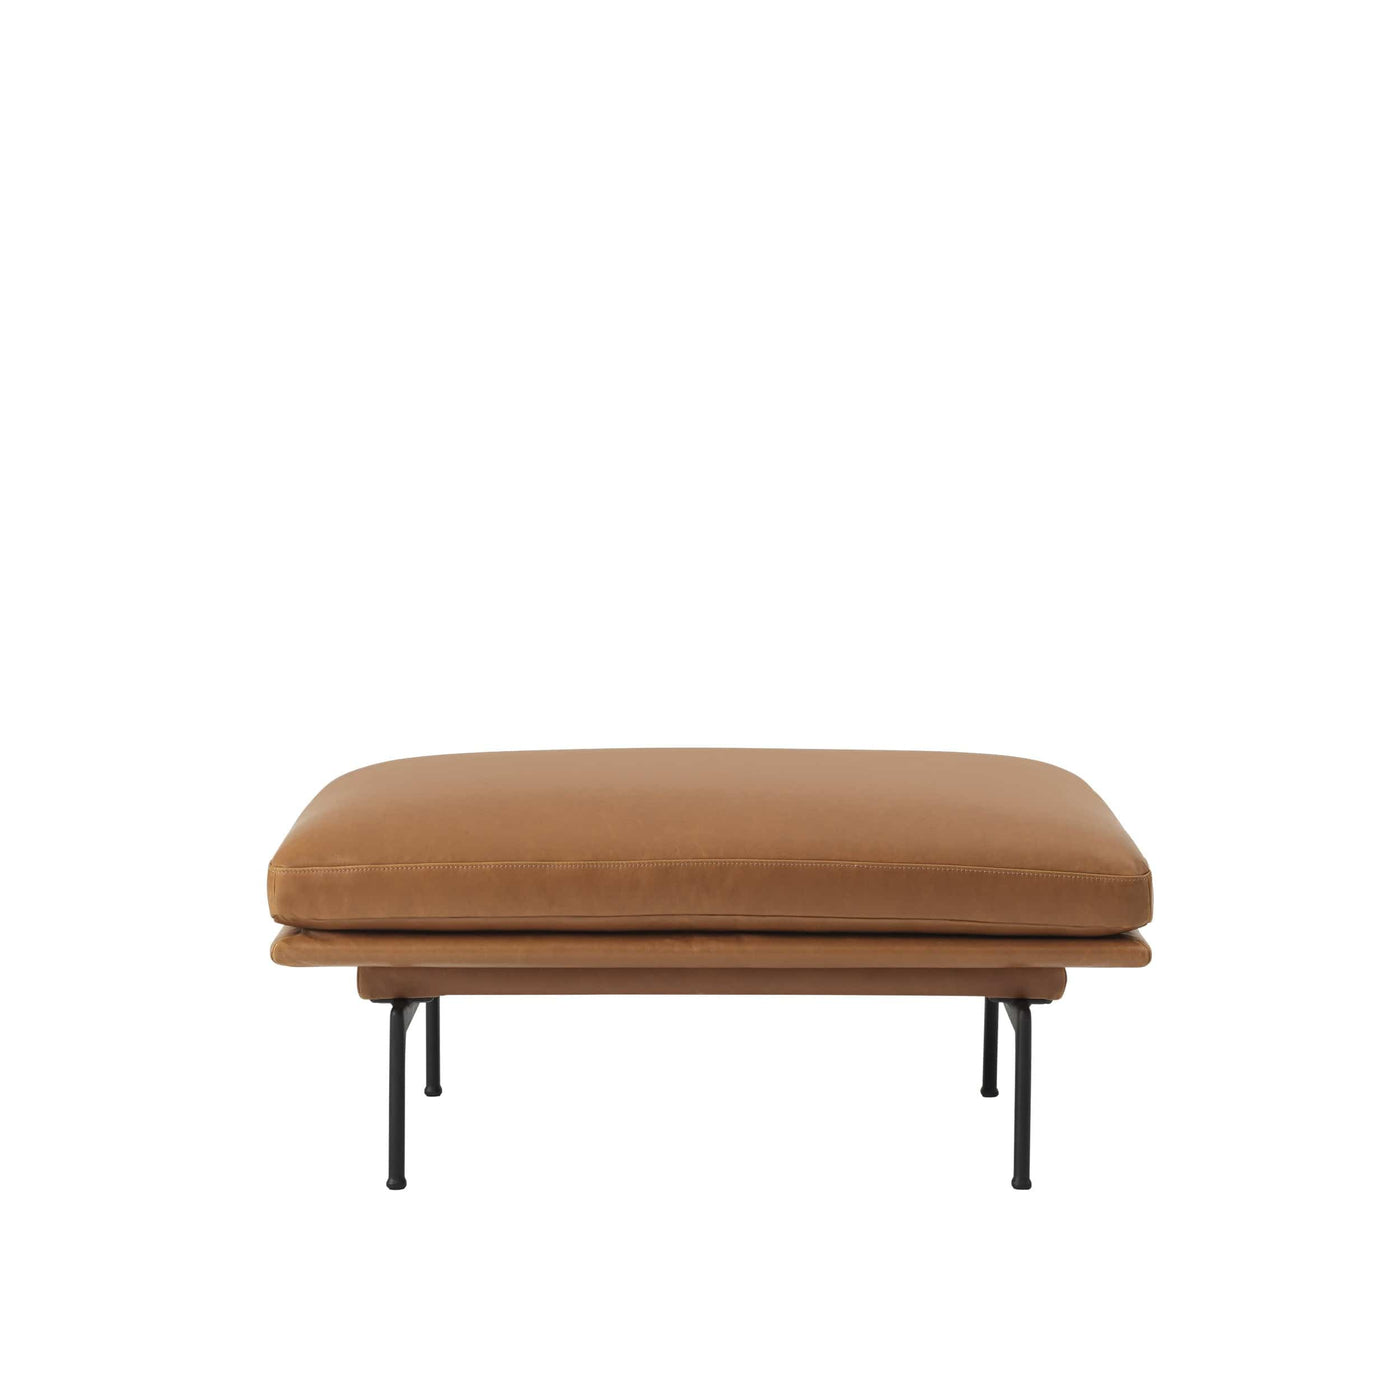 Muuto Outline Pouf in cognac refine leather. made to order from someday designs.